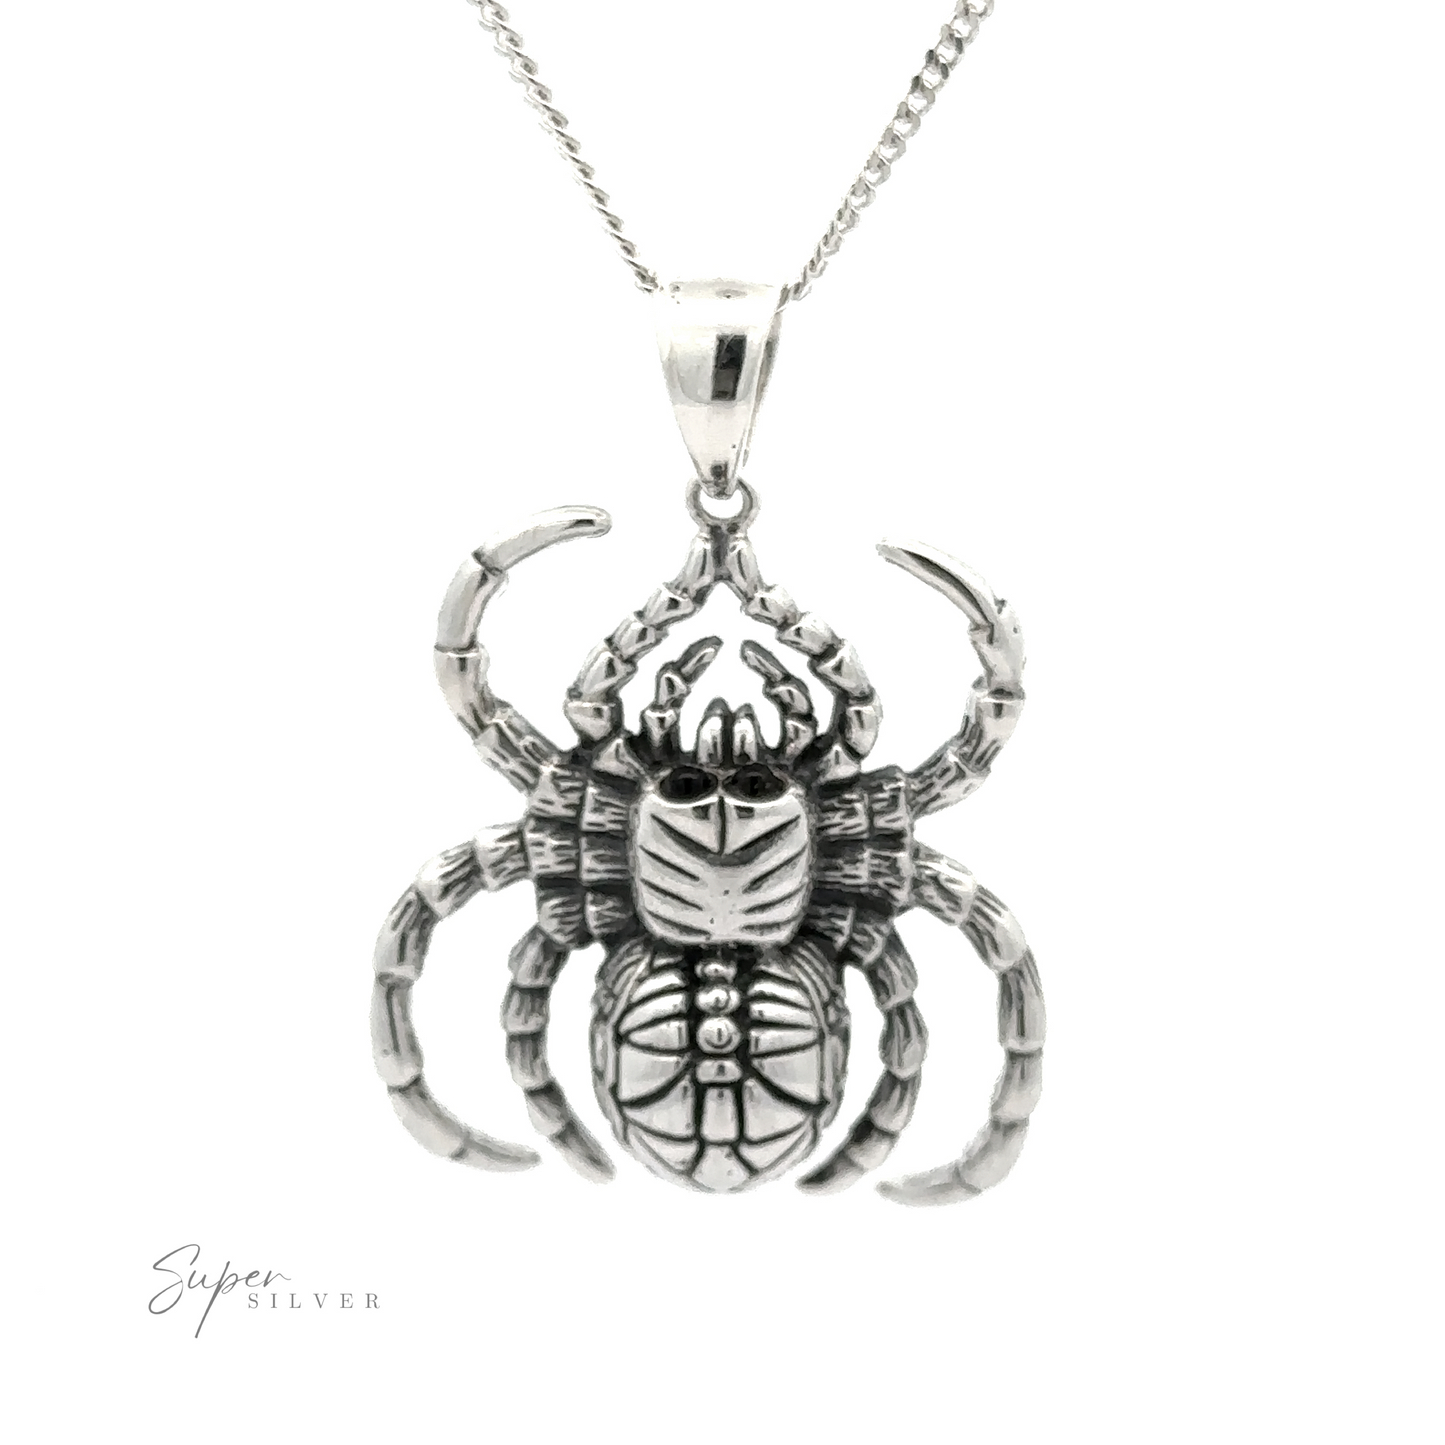 A Large Spider Pendant featuring a pendant shaped like a detailed spider. The handcrafted jewelry piece is intricately designed with eight legs and a segmented body, making it a stunning piece to add to your collection.